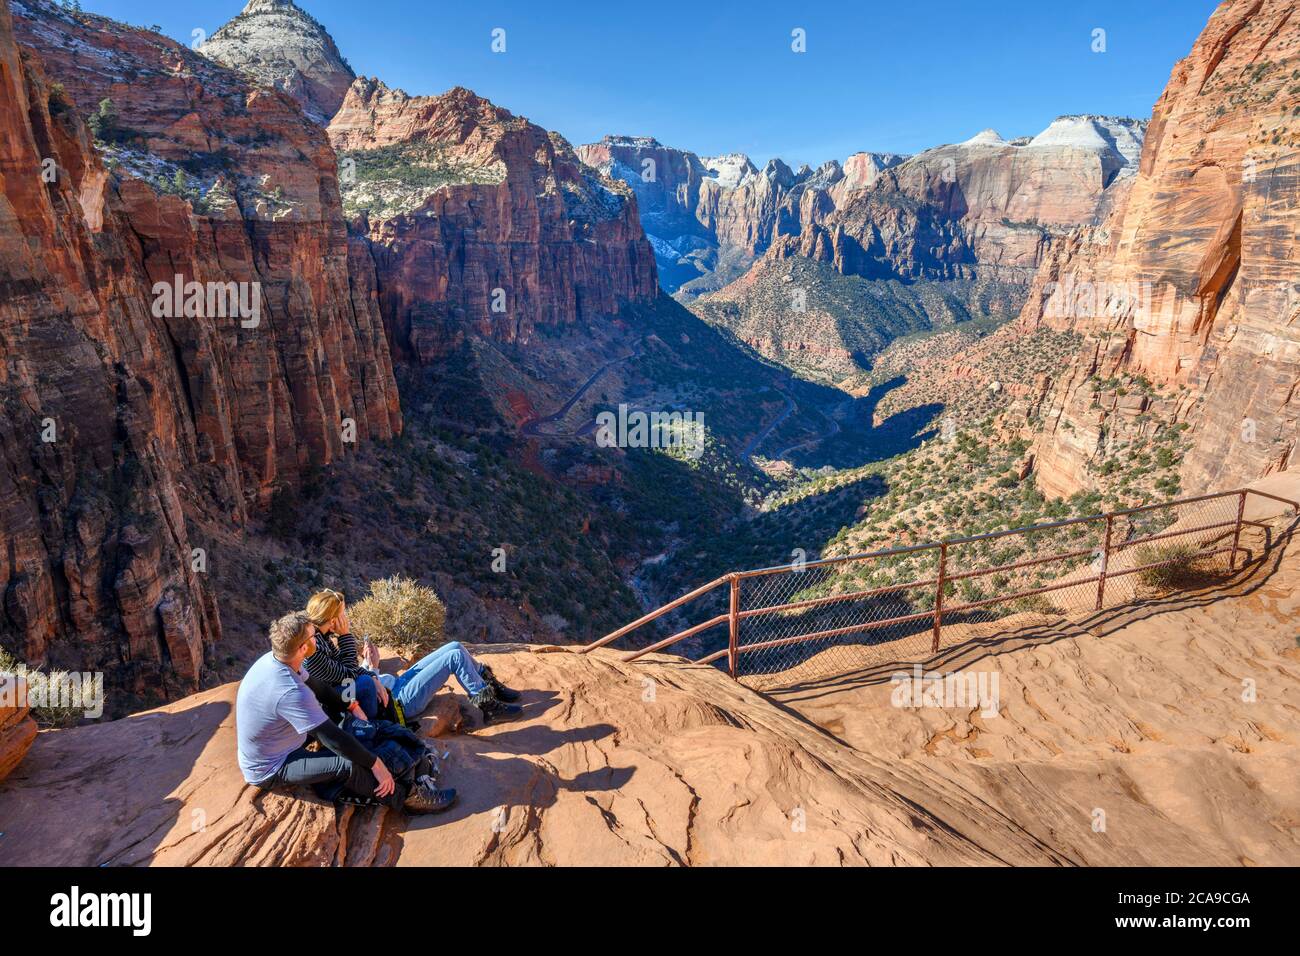 Family sitting on a rock at Canyon Overlook, Zion Canyon, Zion National Park, Utah, USA Stock Photo